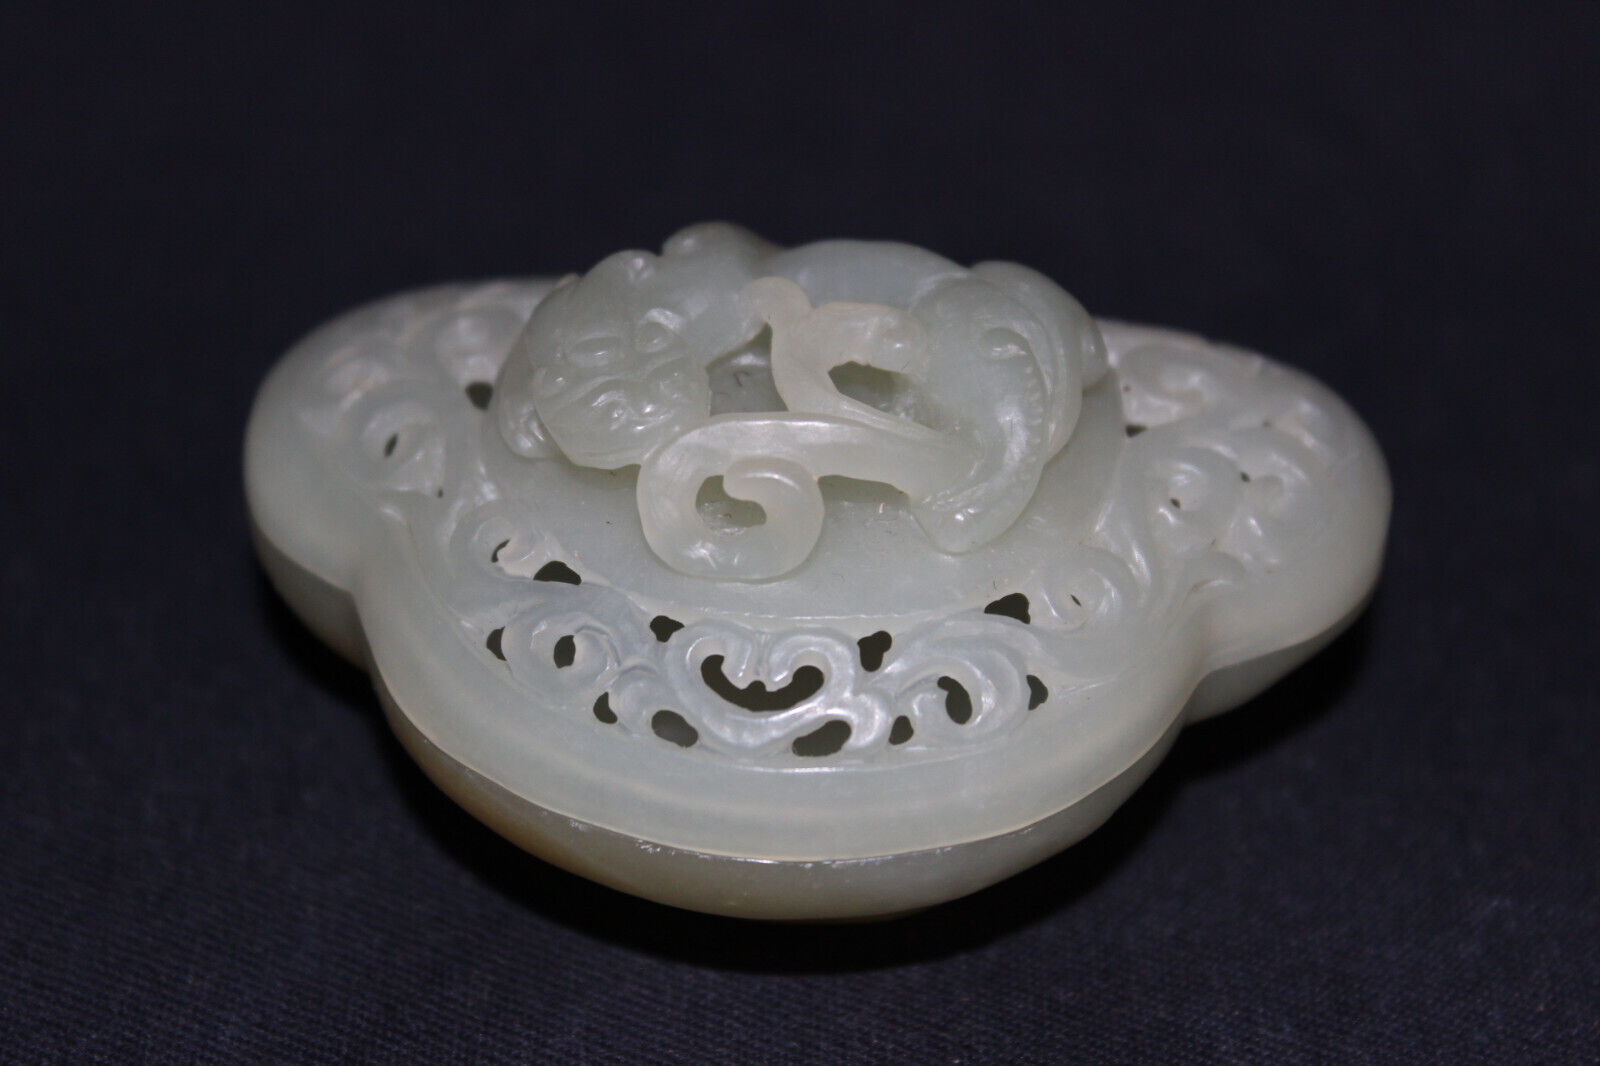 Jade Potpourri Container CH'IH Dragon on Lid, 19th Century Chinese, Qing Dynasty